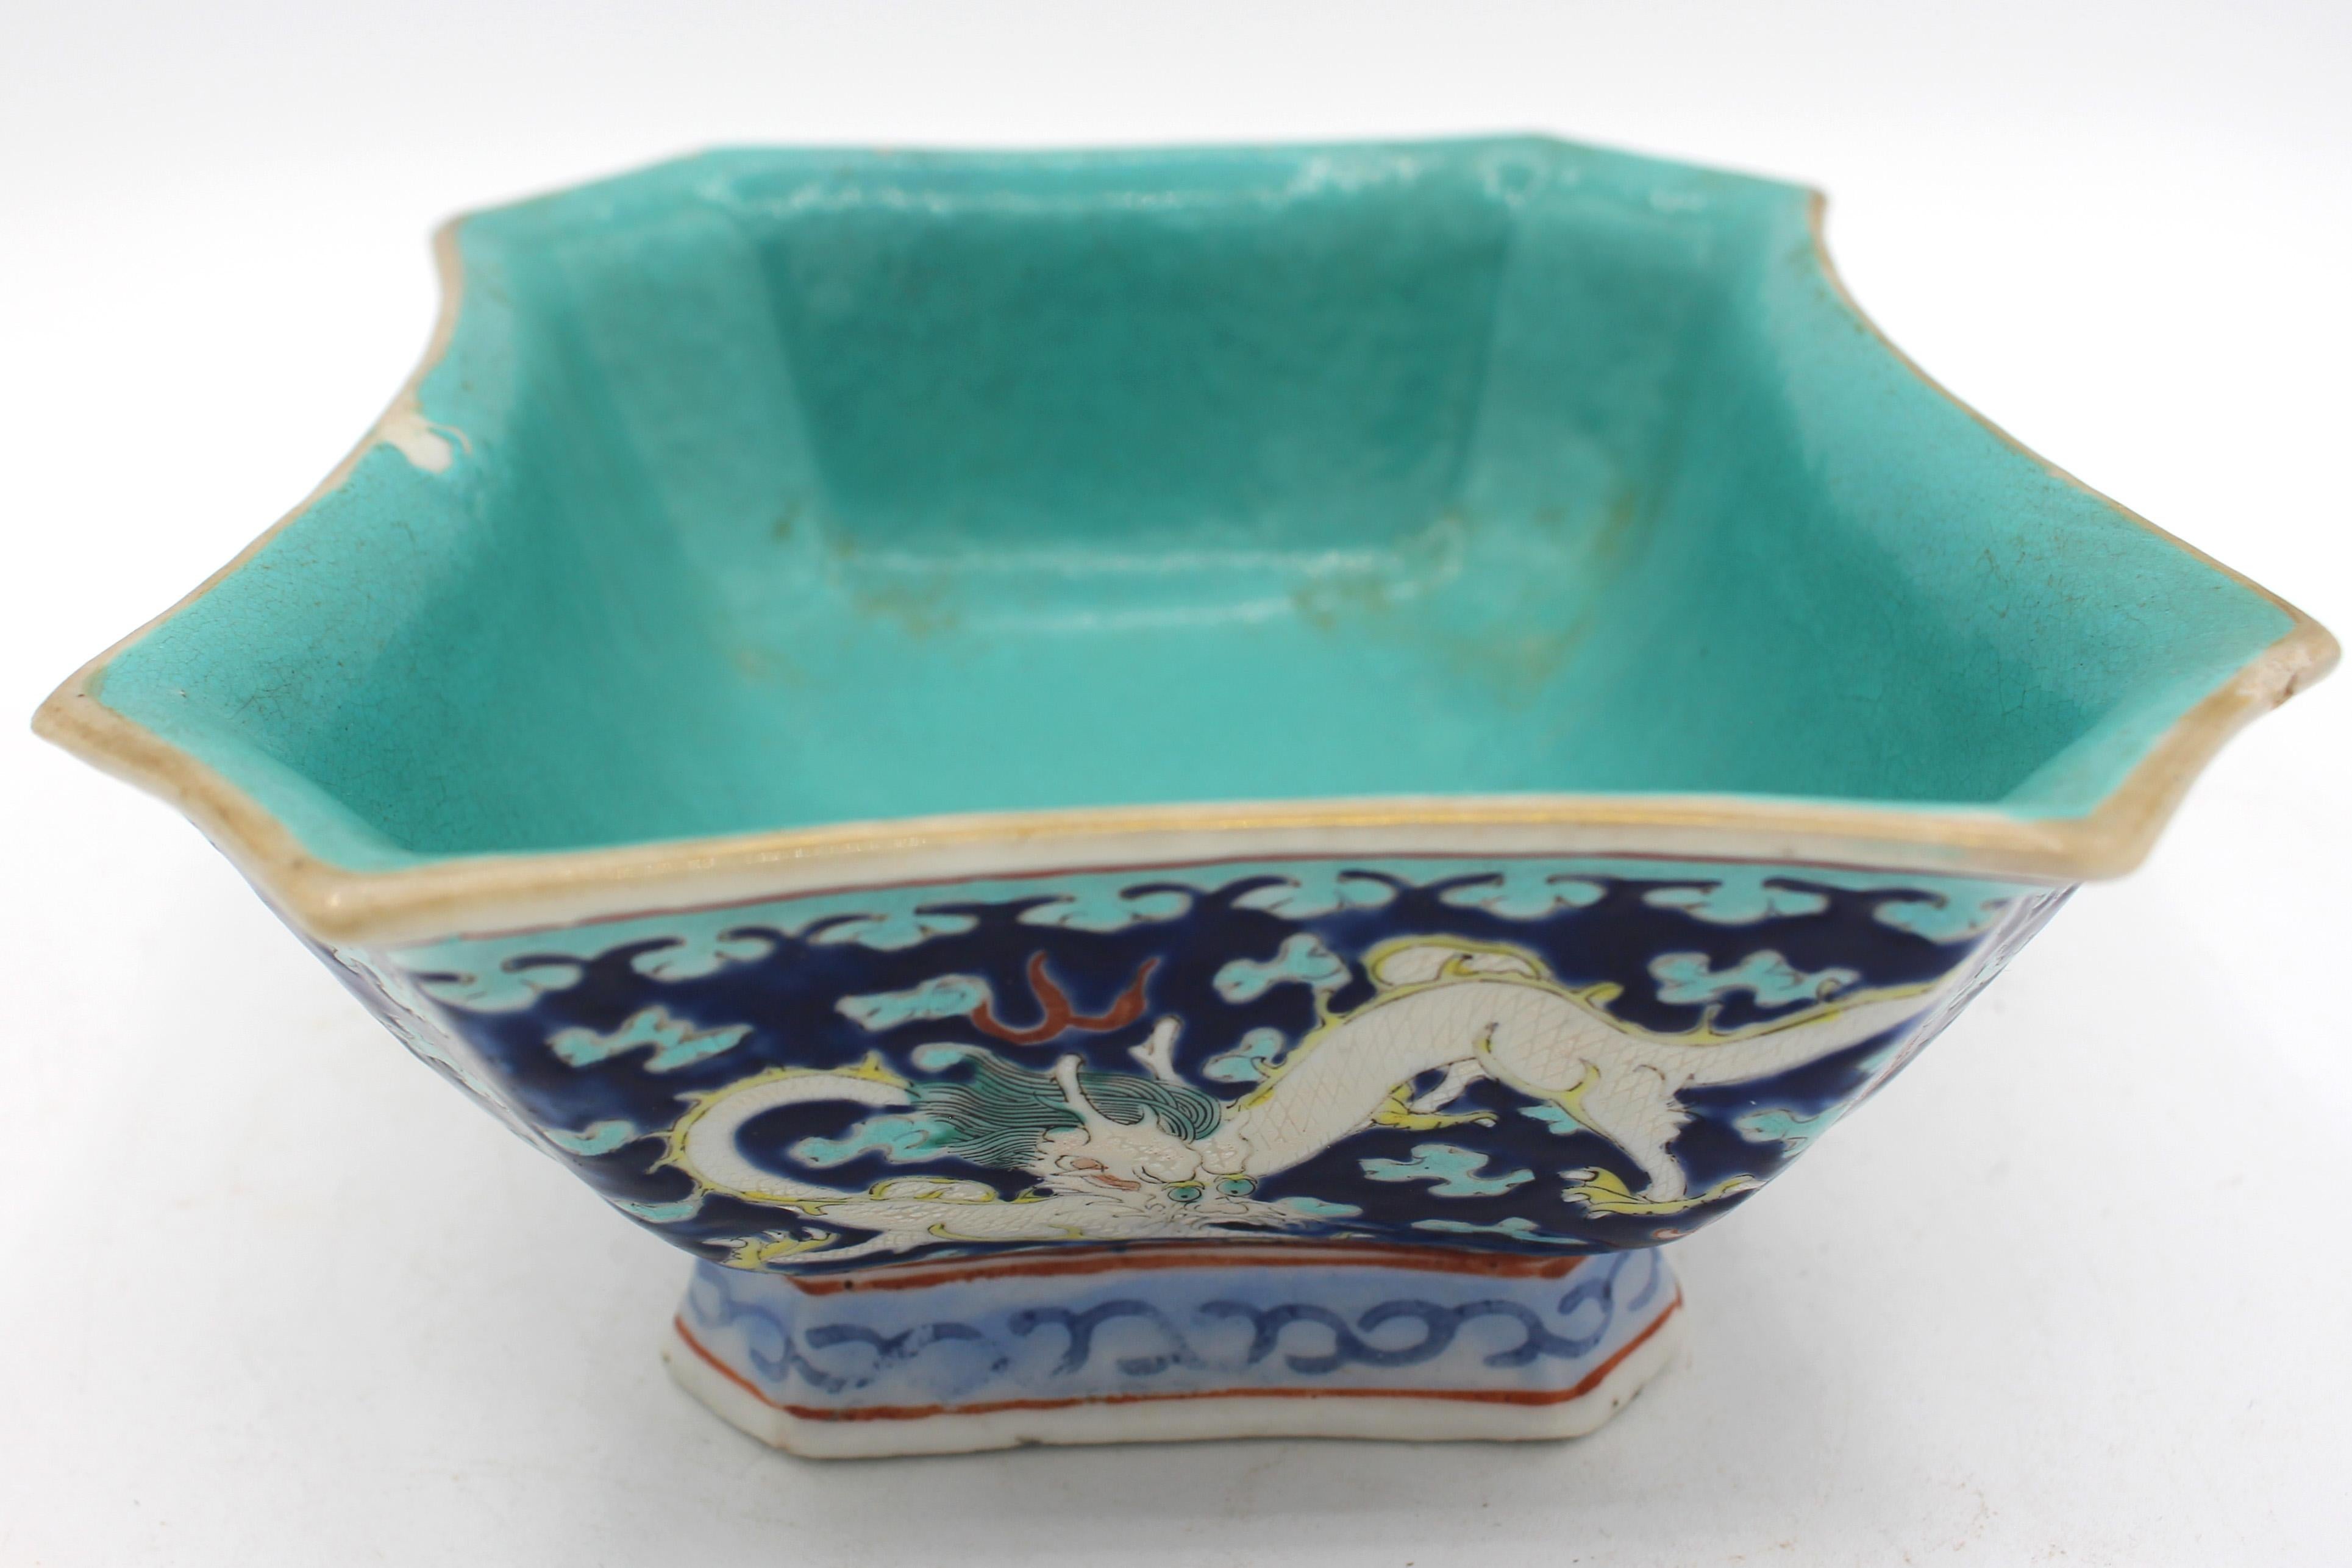 Late 19th-Early 20th Century Pair of Chinese Stacking Bowls In Good Condition For Sale In Chapel Hill, NC